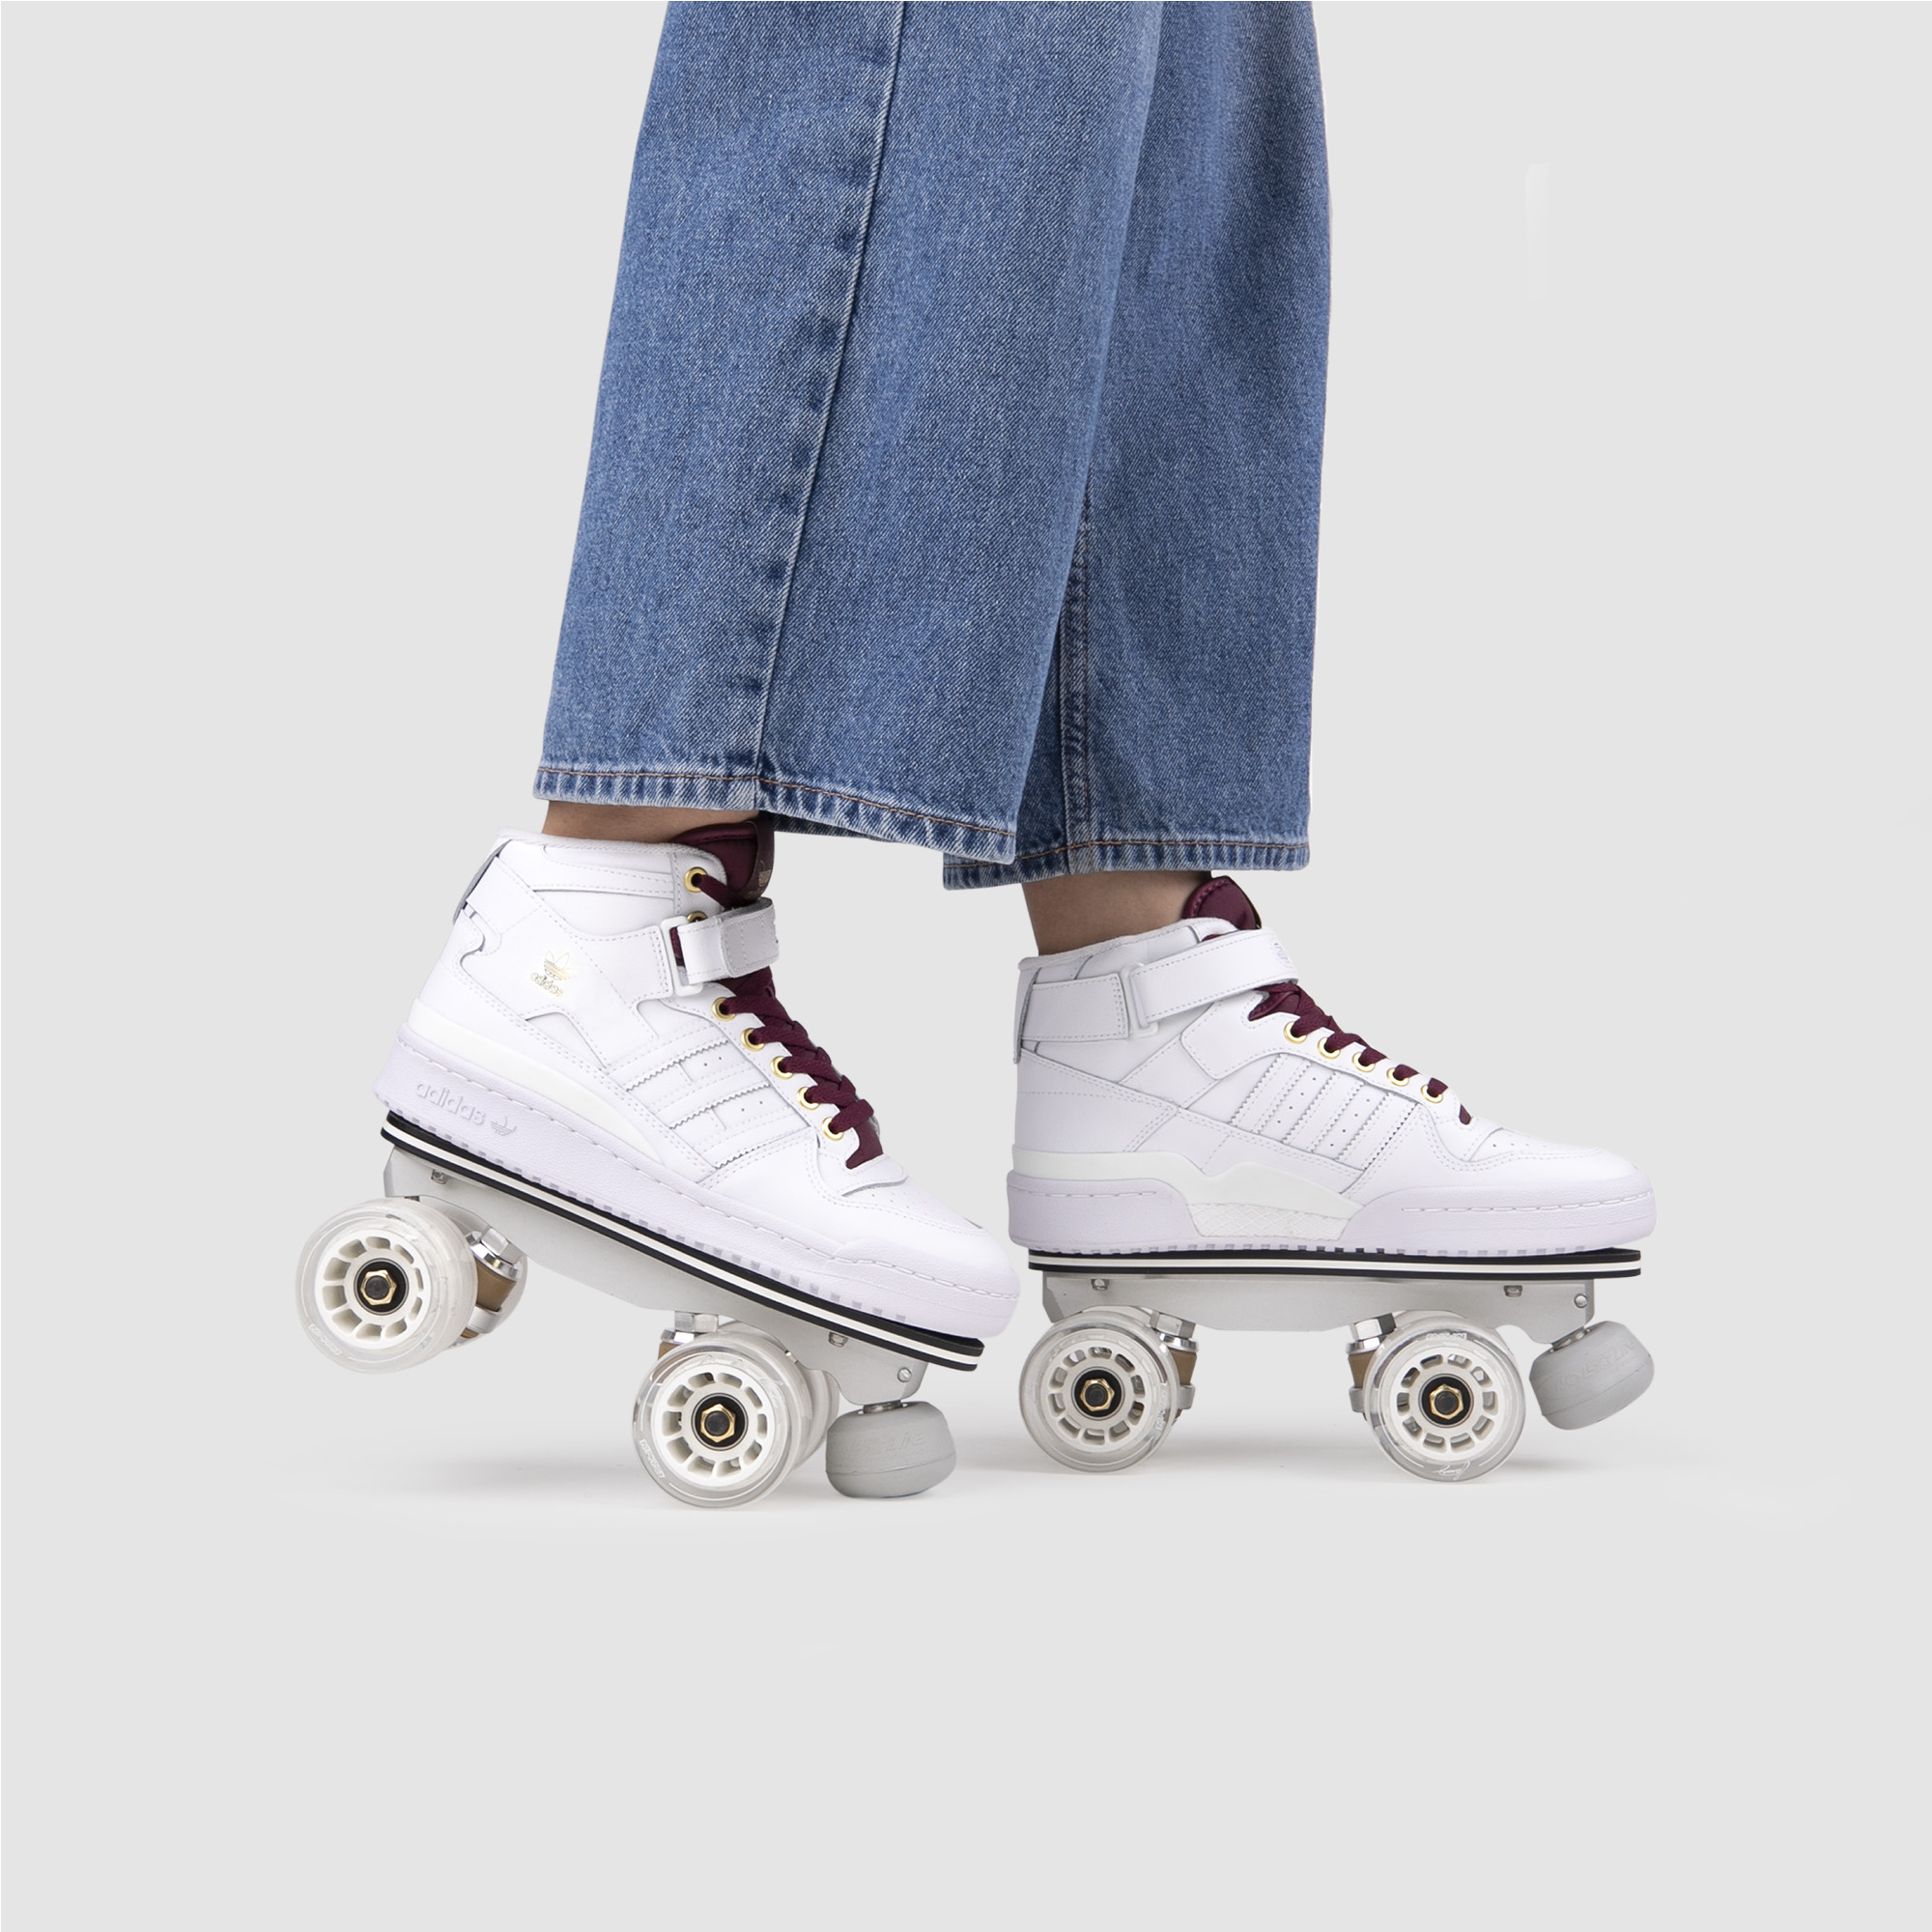 shoes with roller skates on the bottom